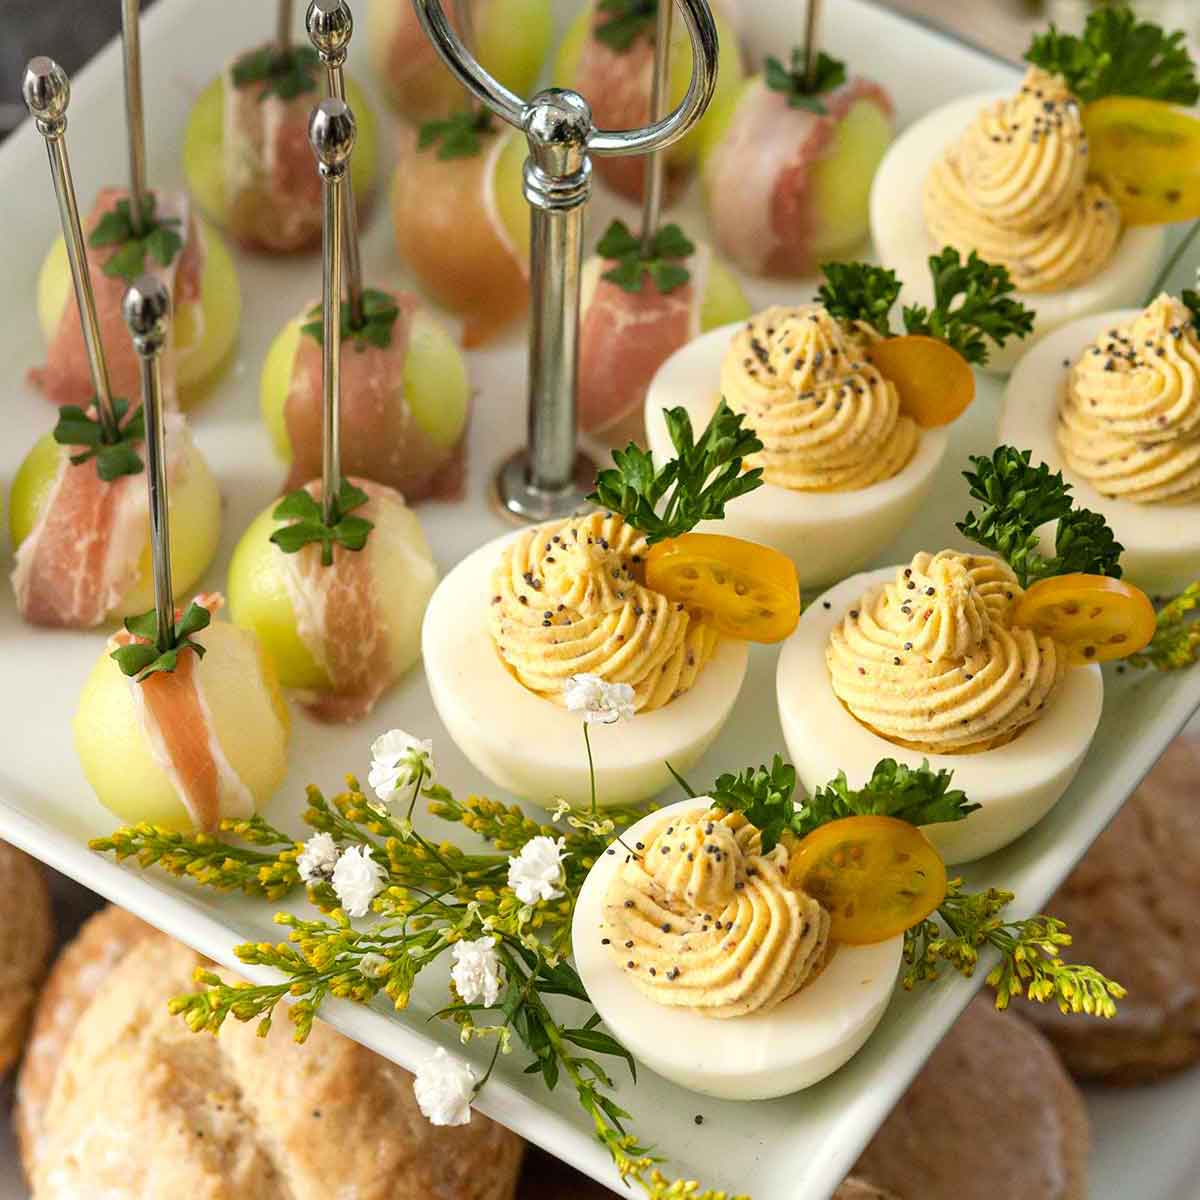 An appetizer tier with deviled eggs and prosciutto-wrapped melon above scones on a table.